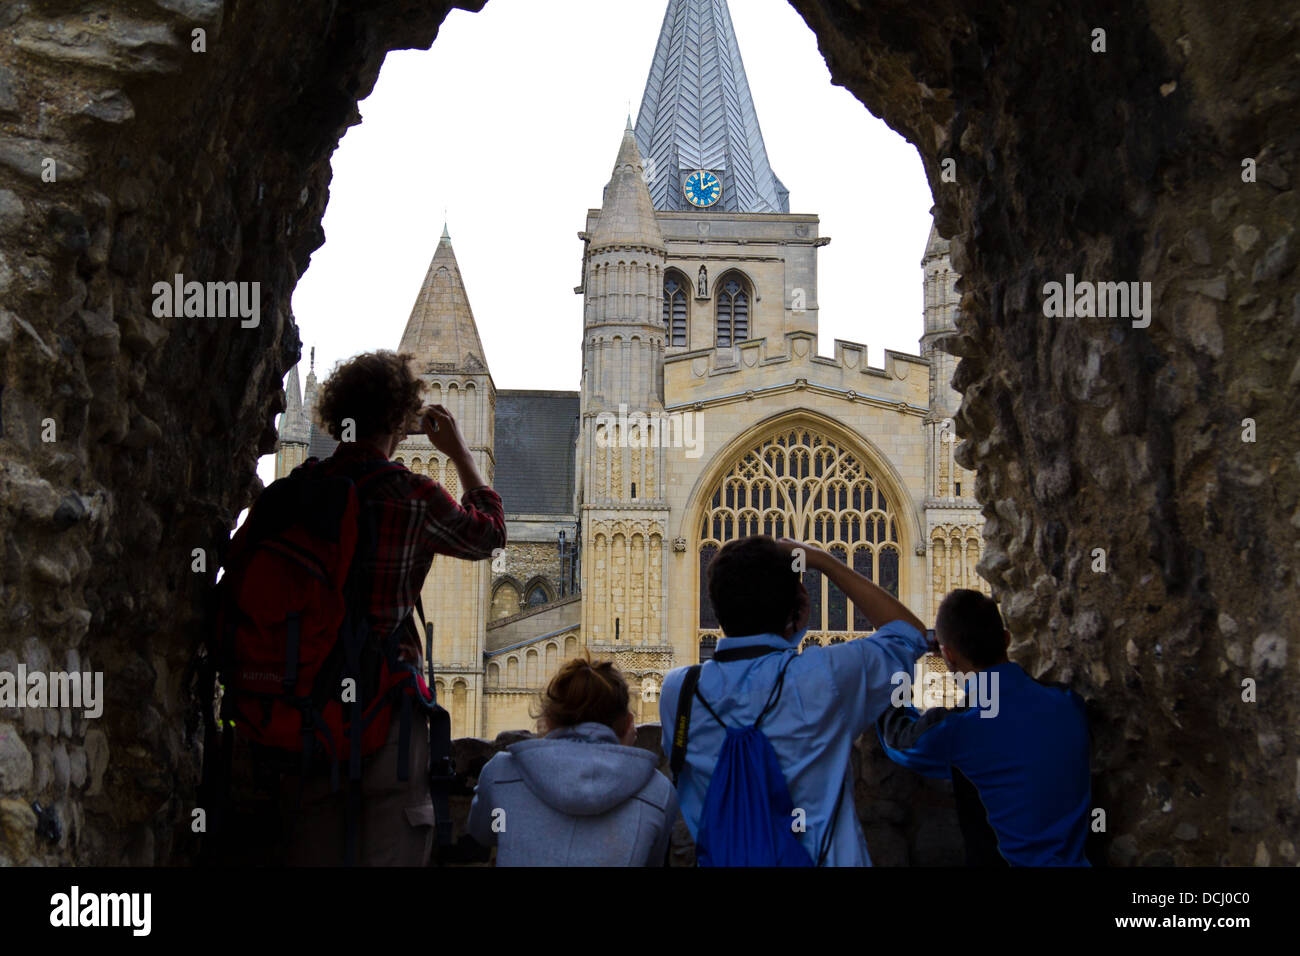 Image of  visitors photographing Rochester Cathedral through a window made in a stone wall on a grey summer day Stock Photo